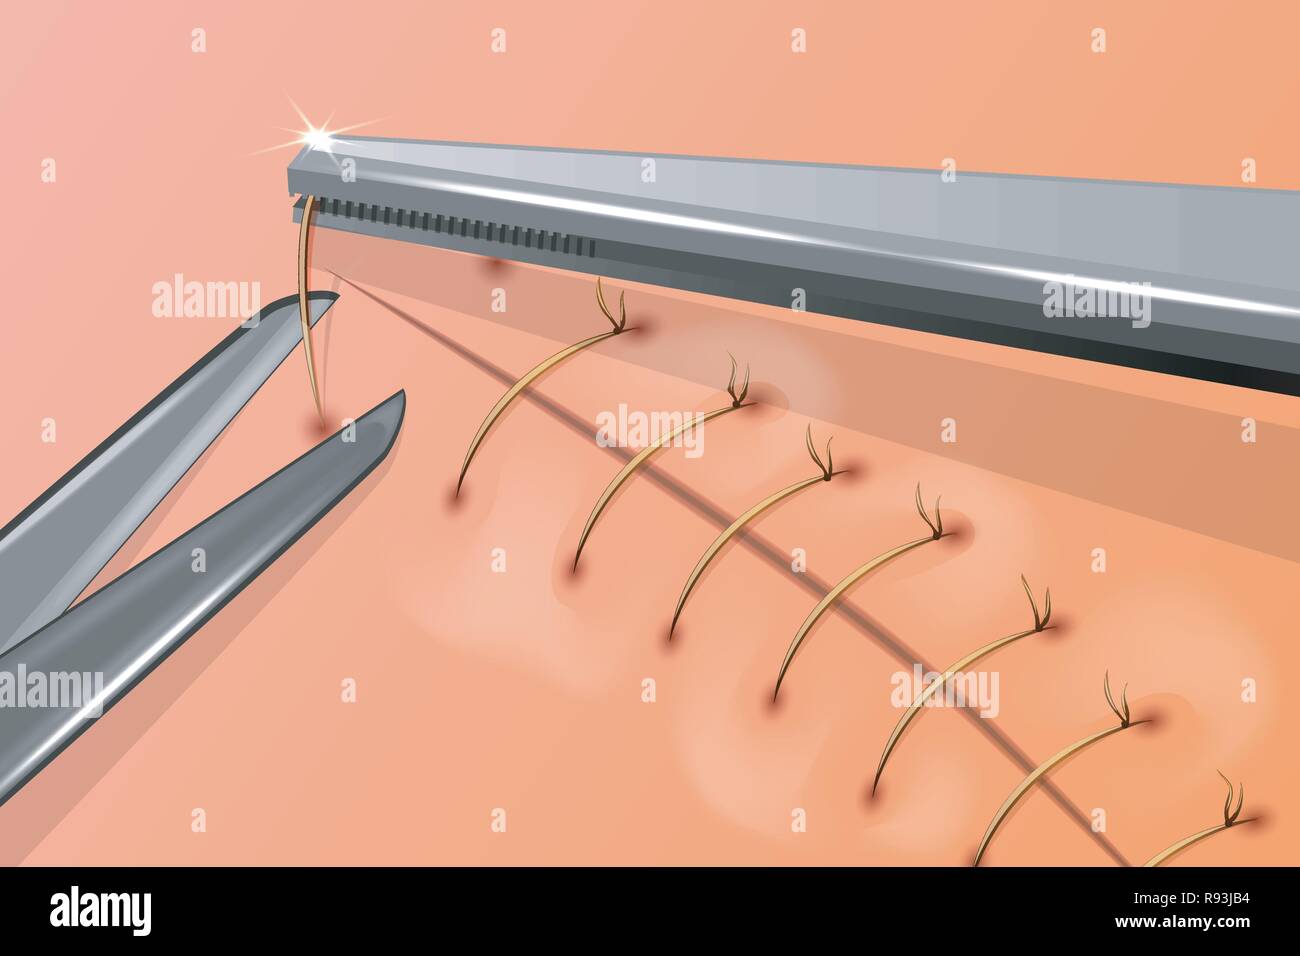 vector illustration of removal of surgical stitches Stock Vector